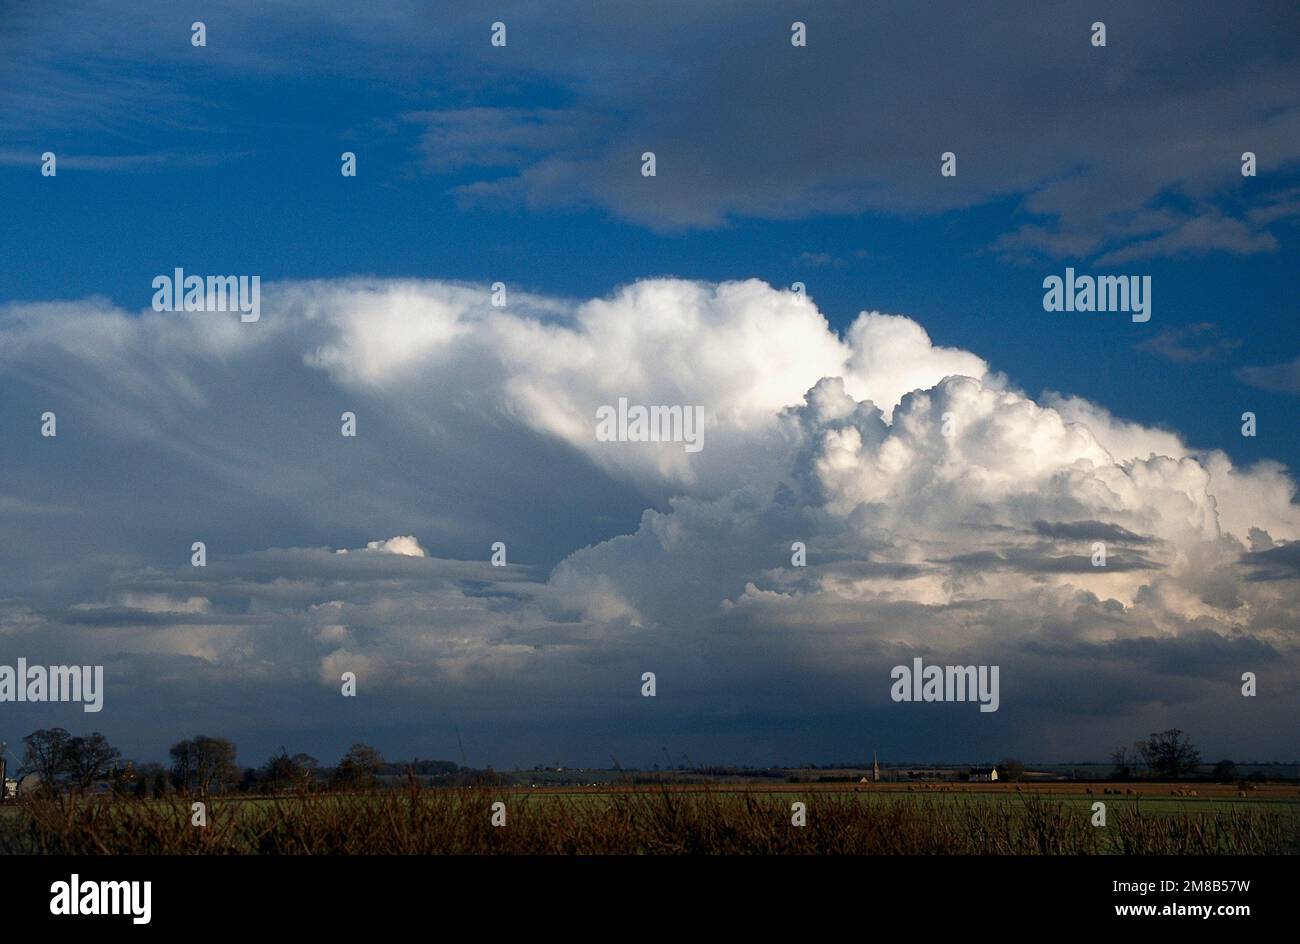 Cumulonimbus Incus, cumulonimbus with an anvil indicating the mature or decaying stage of a thunderstorm, viewed over the green countryside. Stock Photo